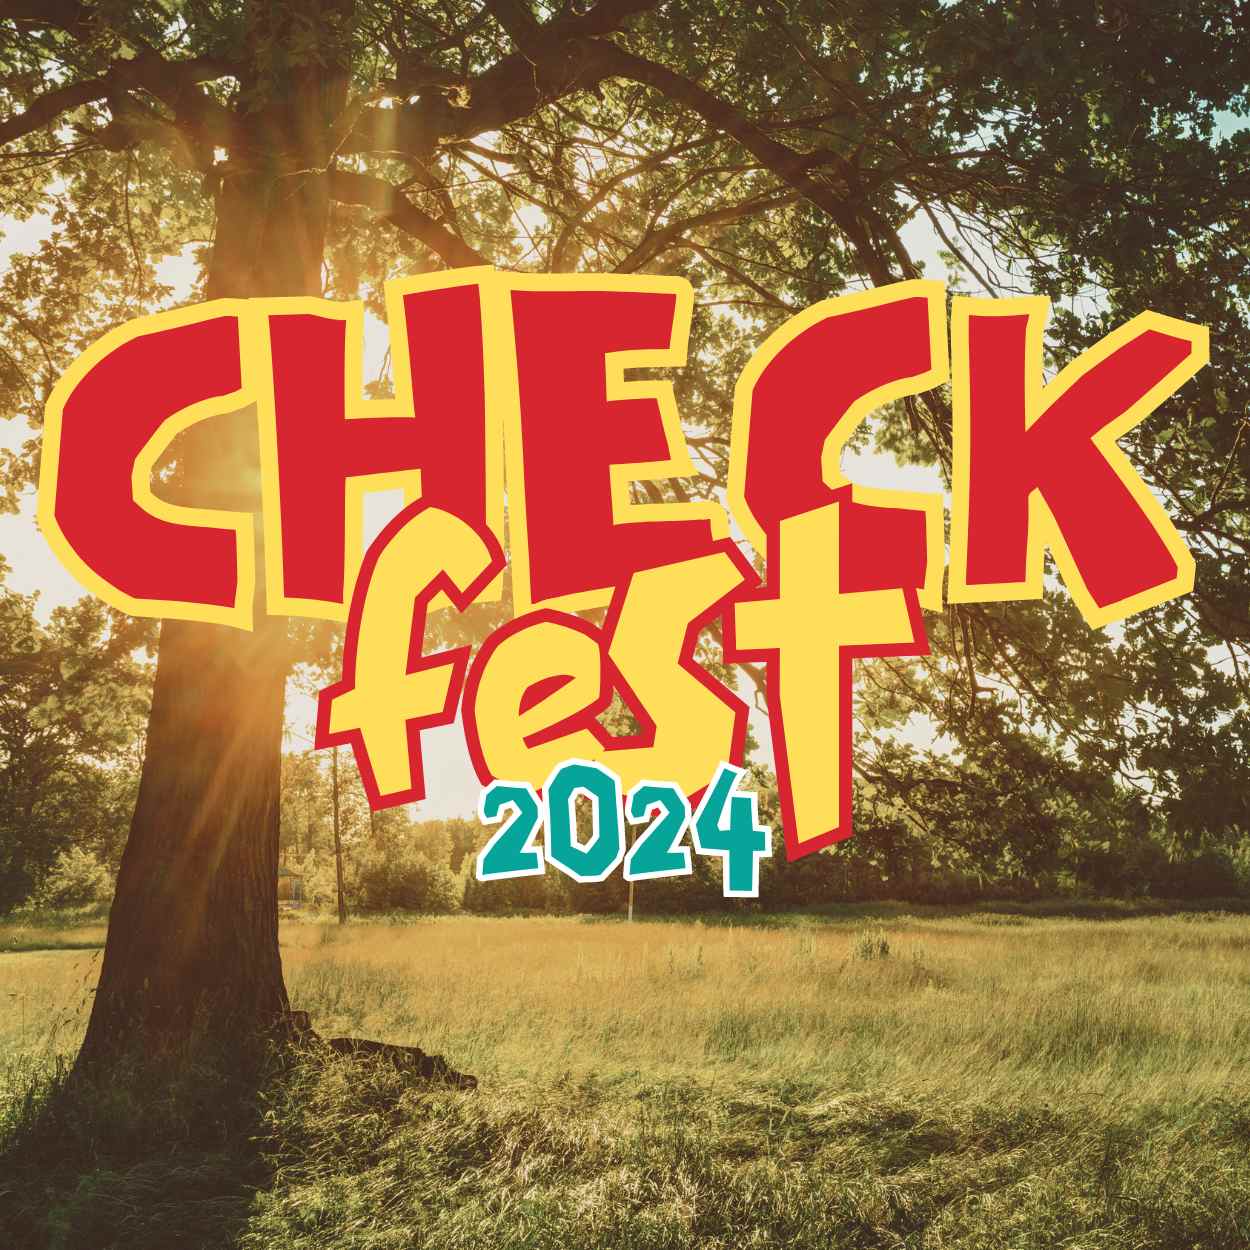 CheckFest EARLY BIRD admission ticket